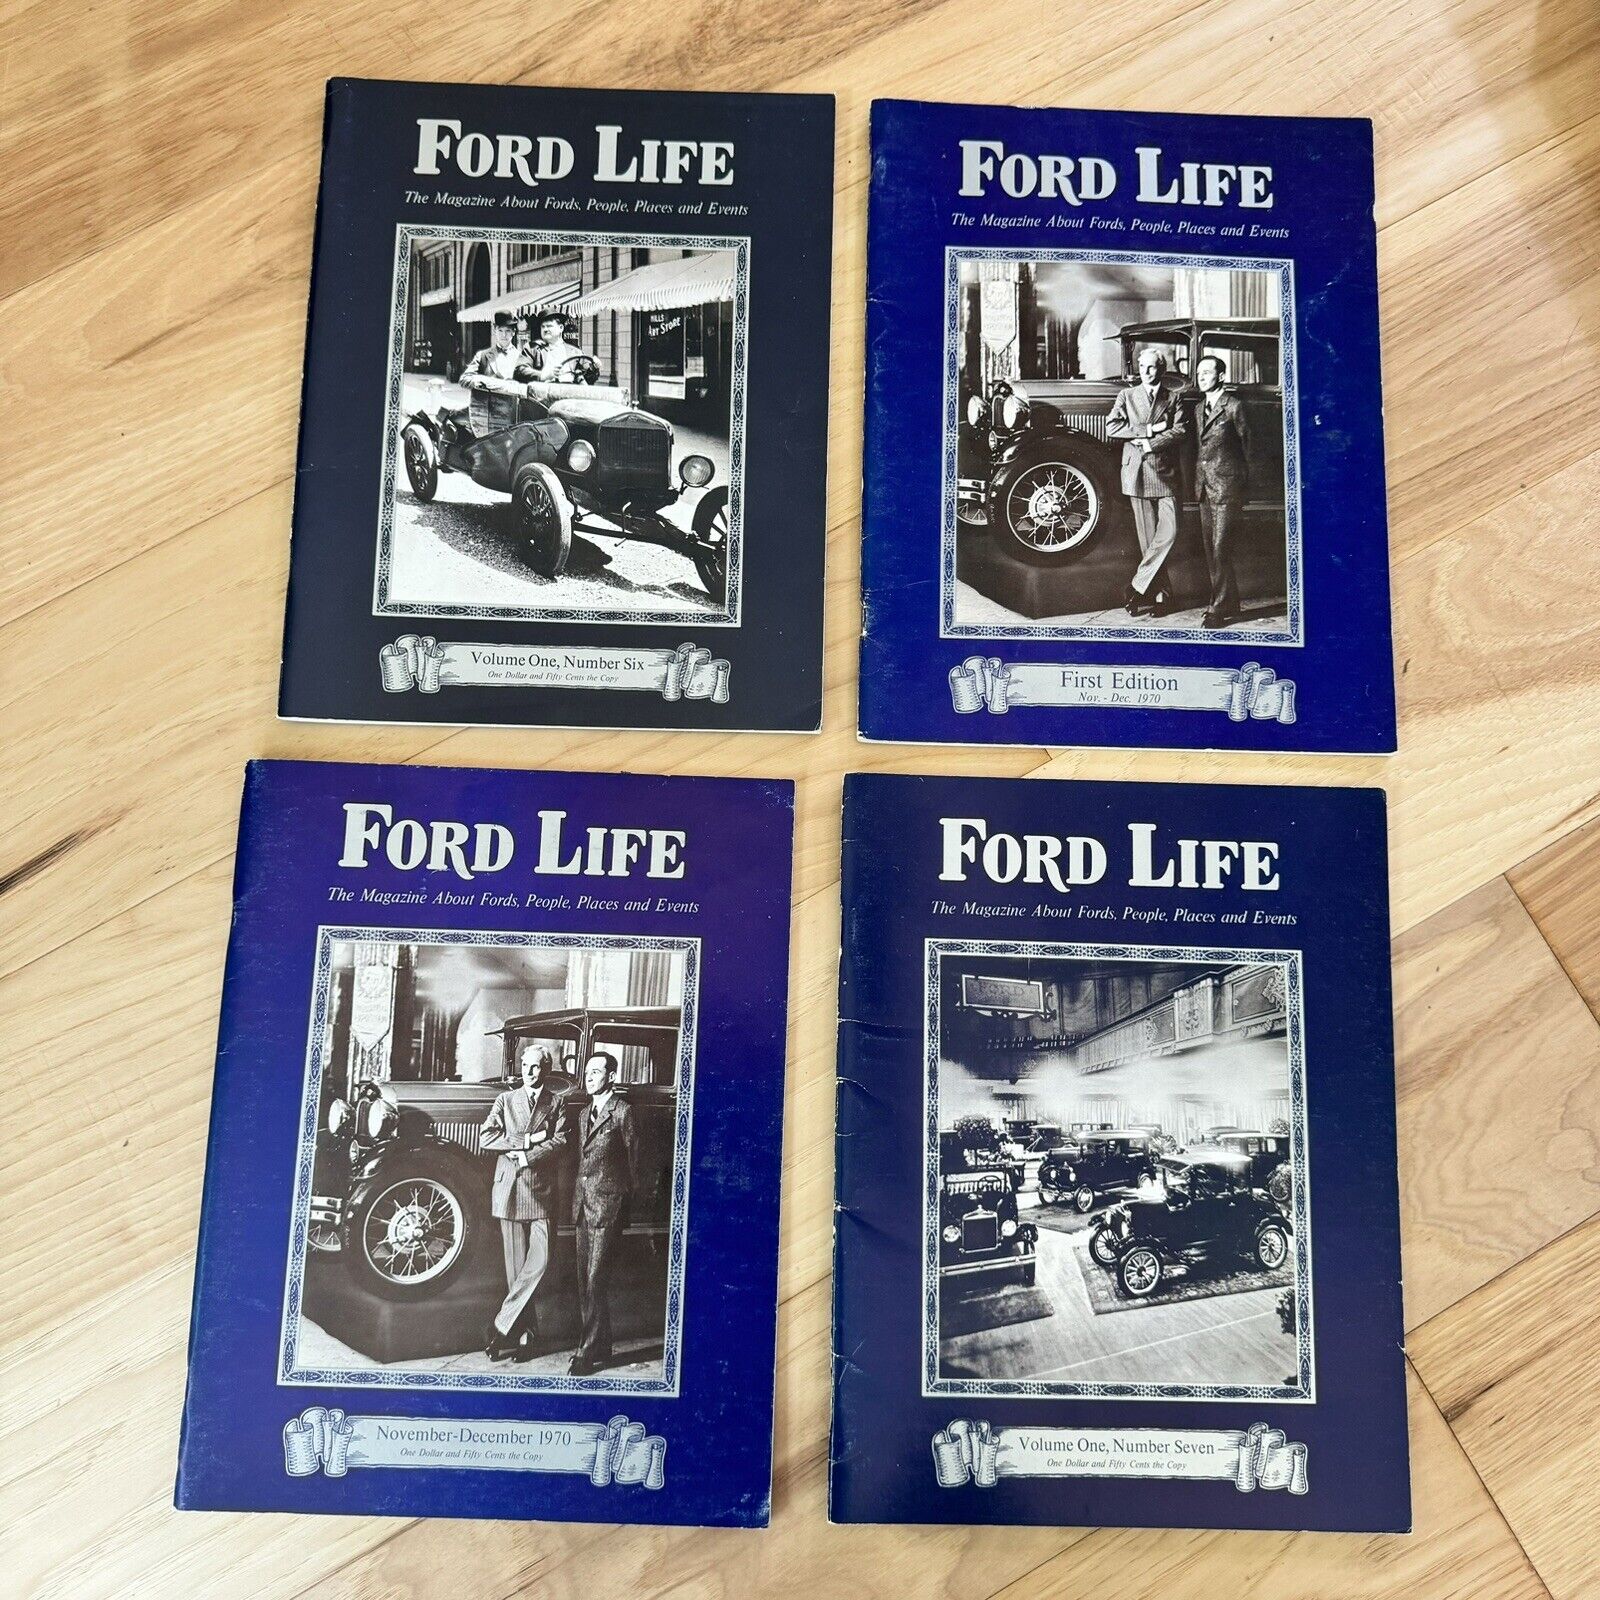 Vtg 1970s FORD LIFE Magazine Fords, People, Places & Events Automotive 4pc Lot